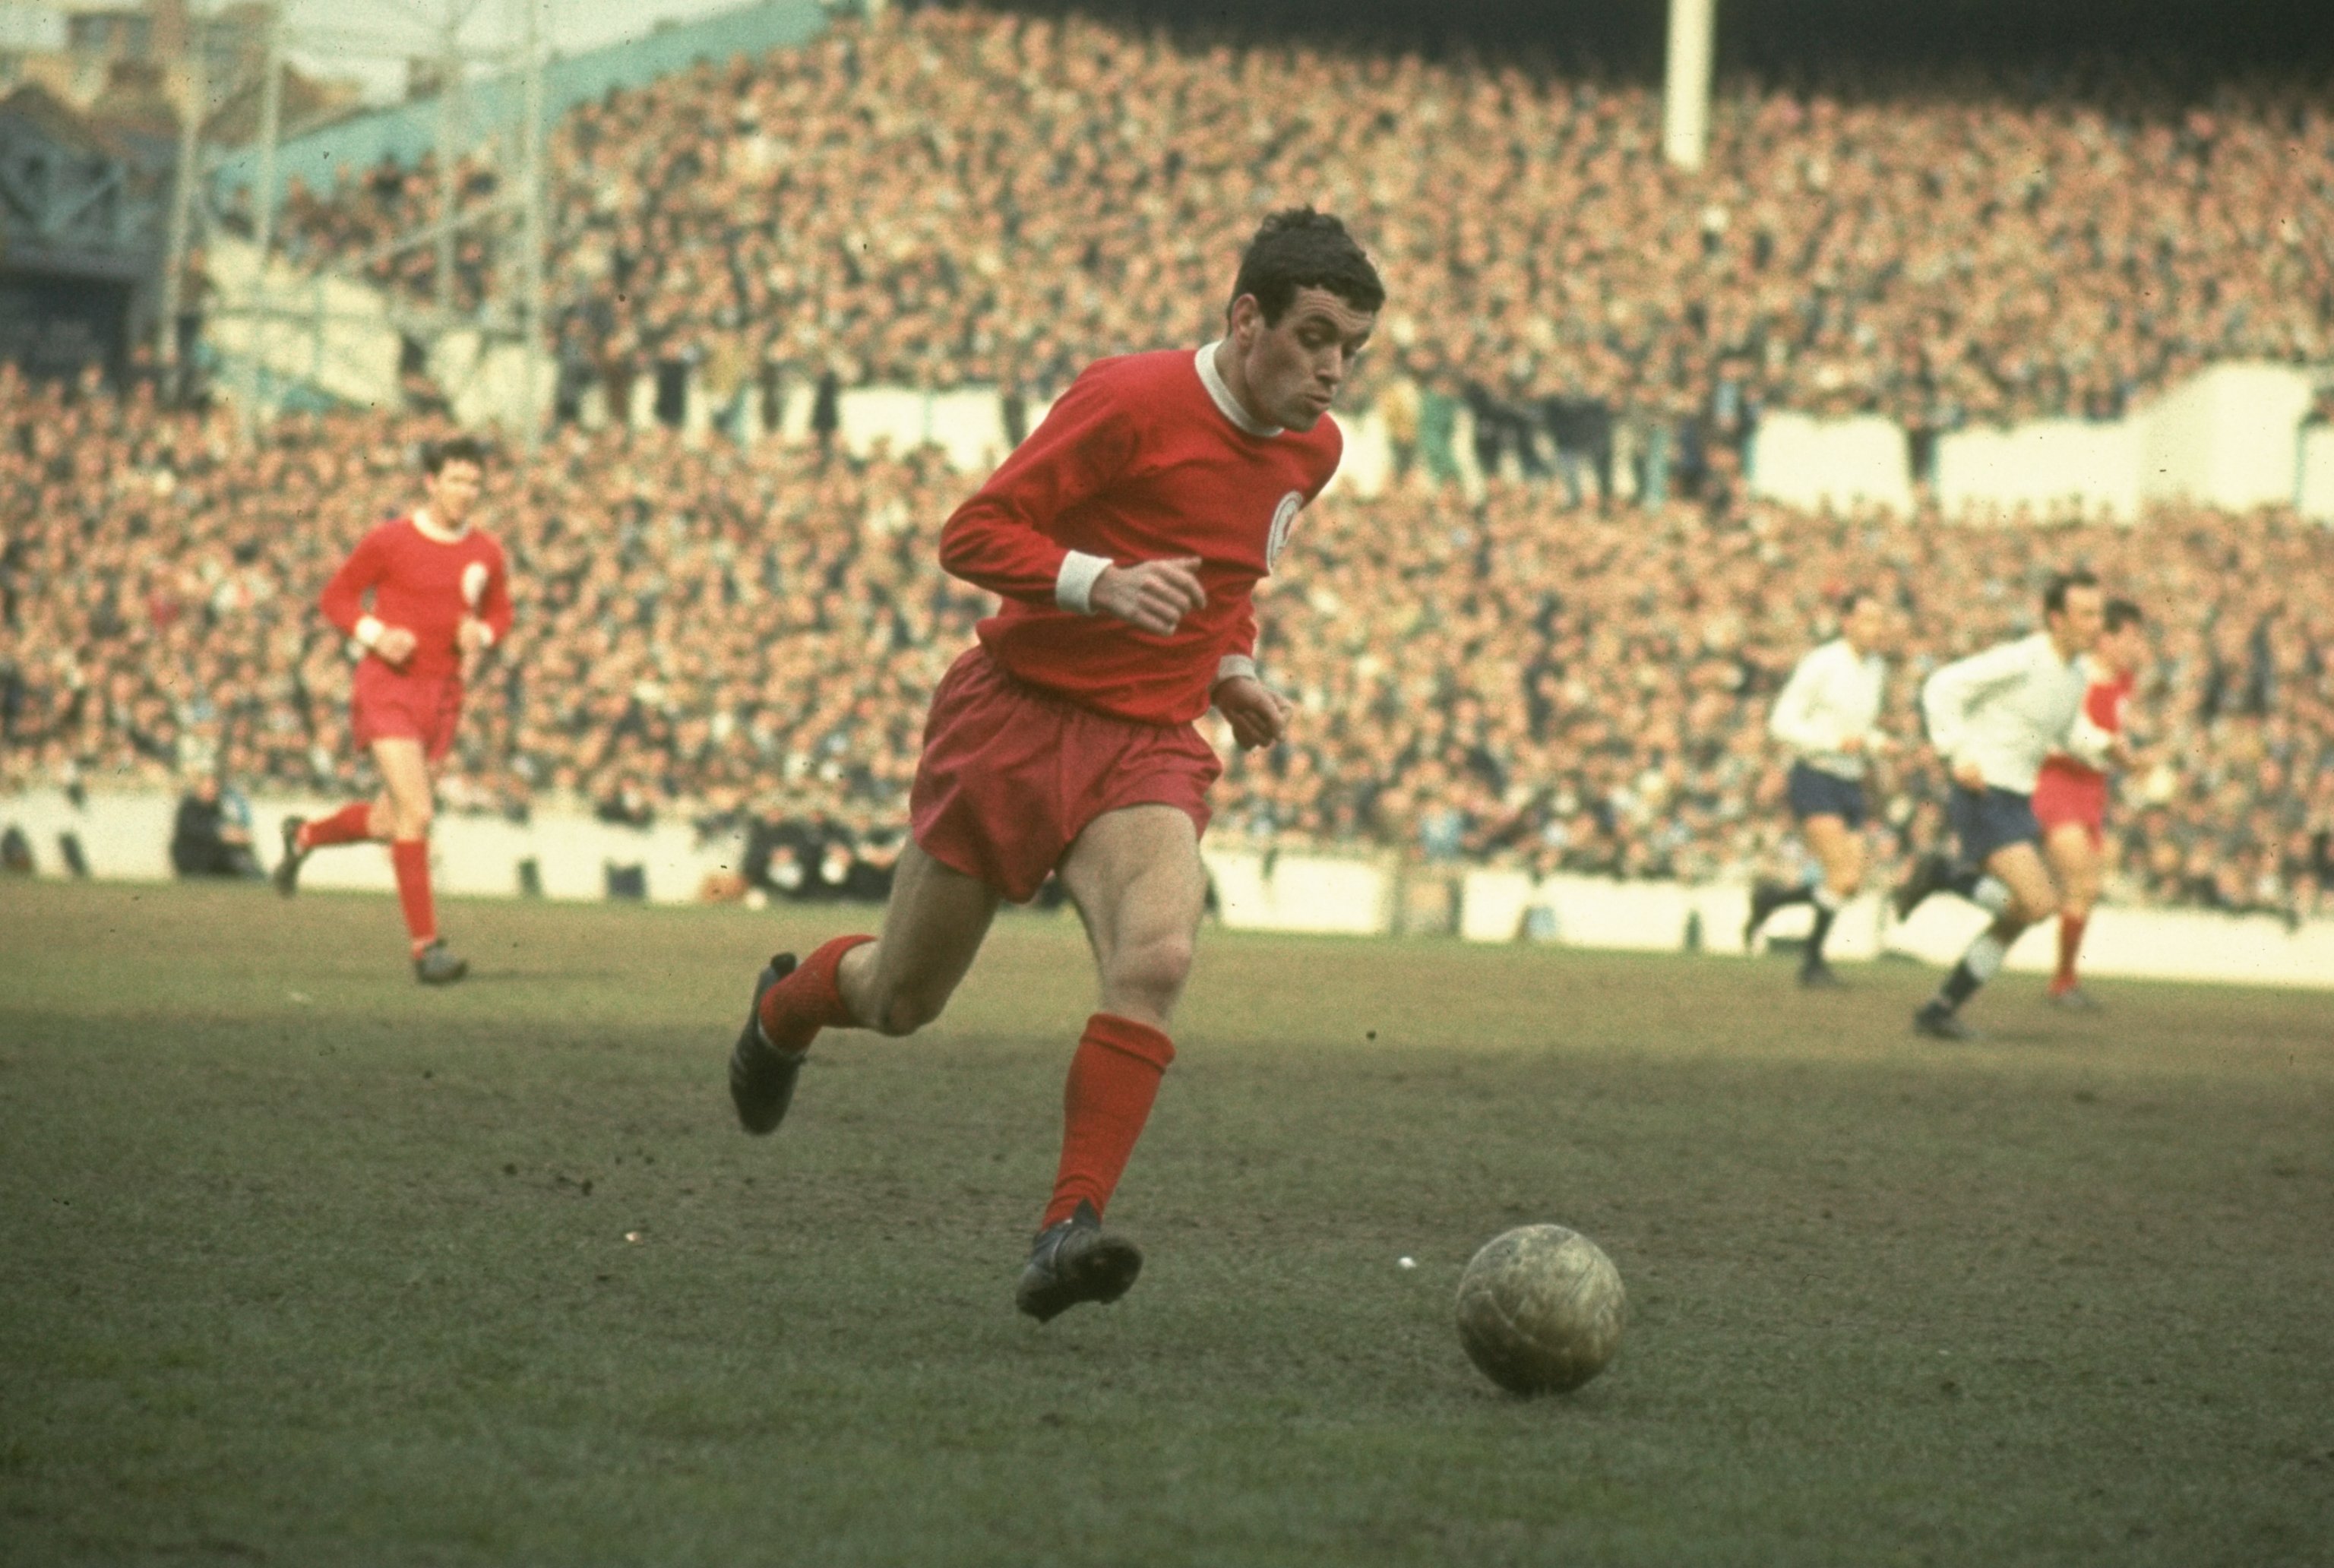 1967:  Ian Callaghan of Liverpool in action during a Football League Division One match against Liverpool at White Hart Lane in London.  \ Mandatory Credit: Allsport UK /Allsport